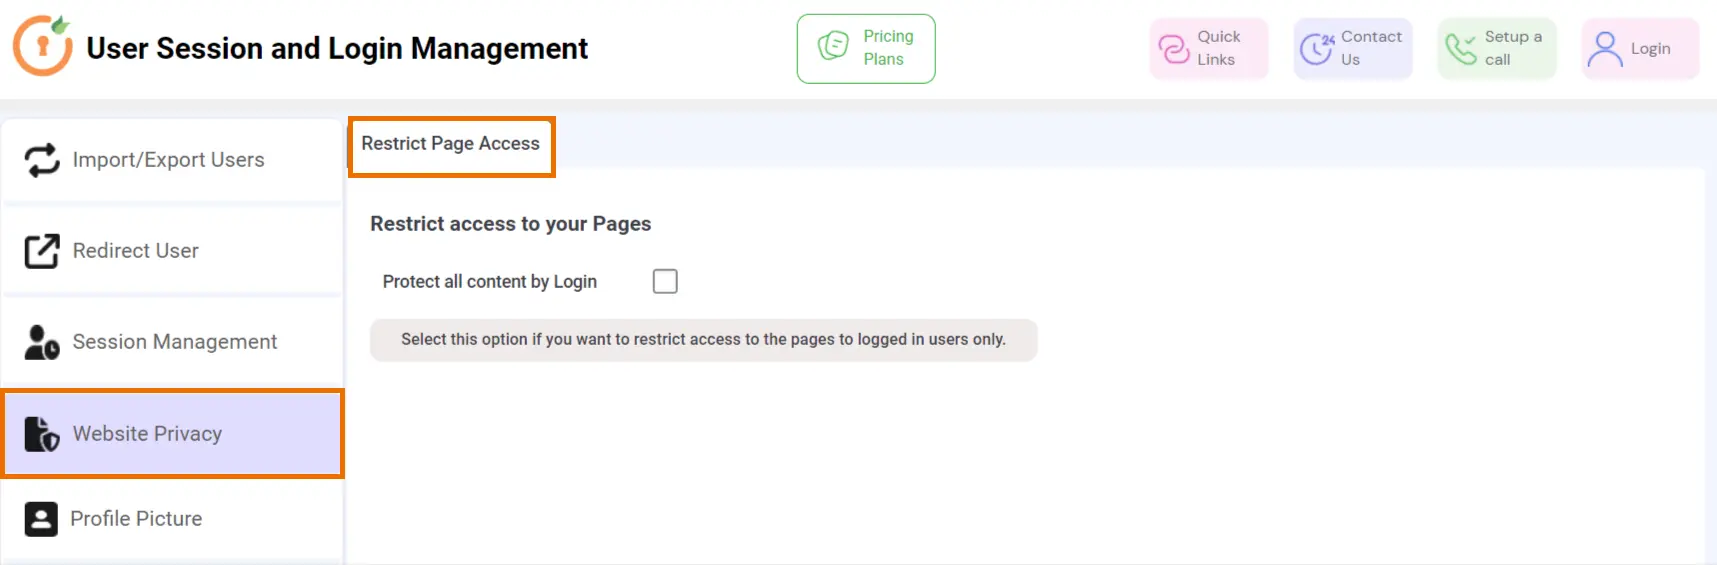 User session and login management website privacy restrict page access